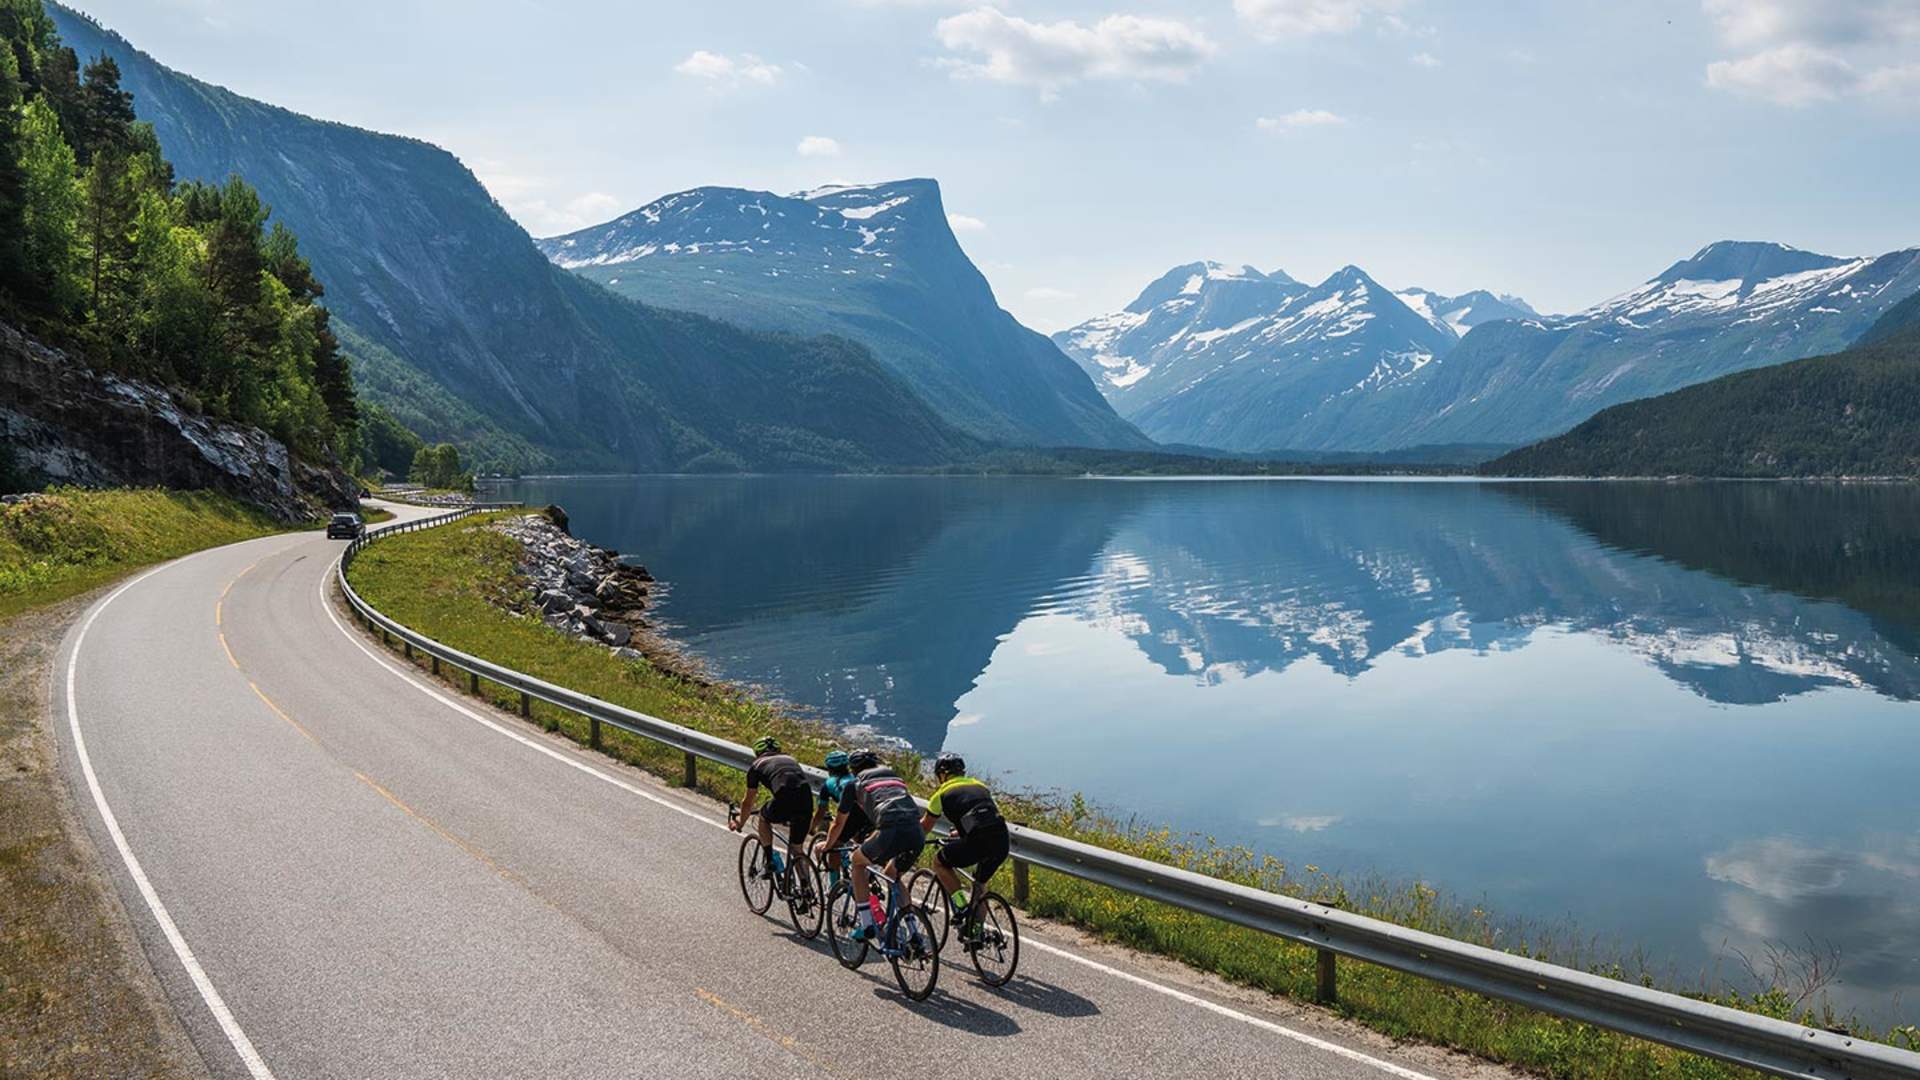 The Classic Fjord Tour